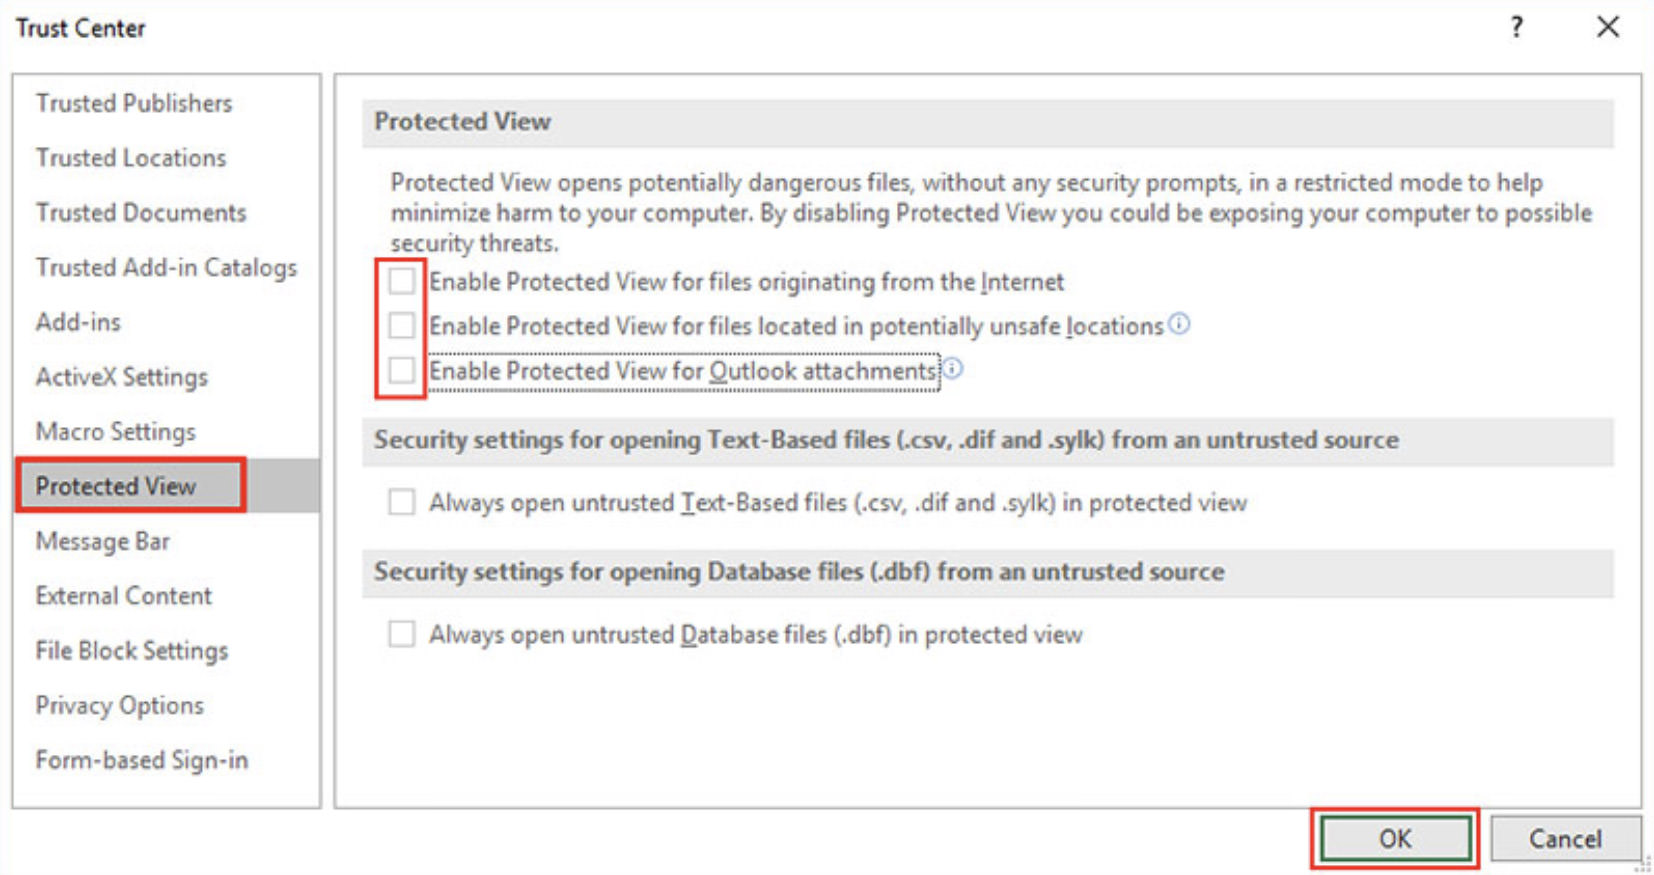 Disabling Protected View